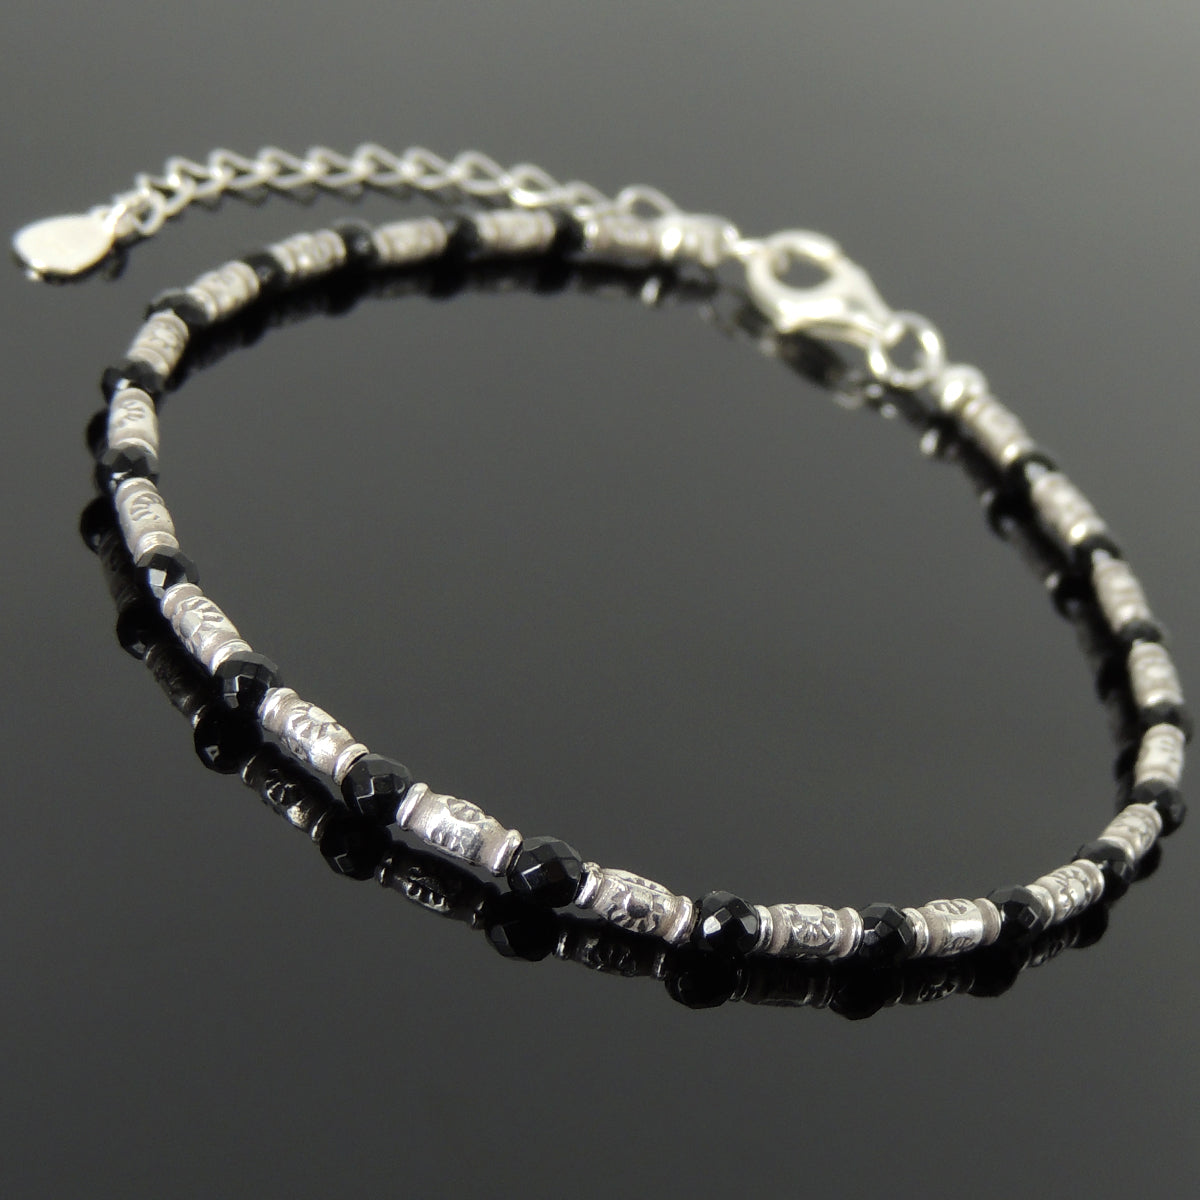 3mm Faceted Black Onyx Healing Gemstone Bracelet with S925 Sterling Silver Vintage Sun Barrel Beads & Clasp - Handmade by Gem & Silver BR1299